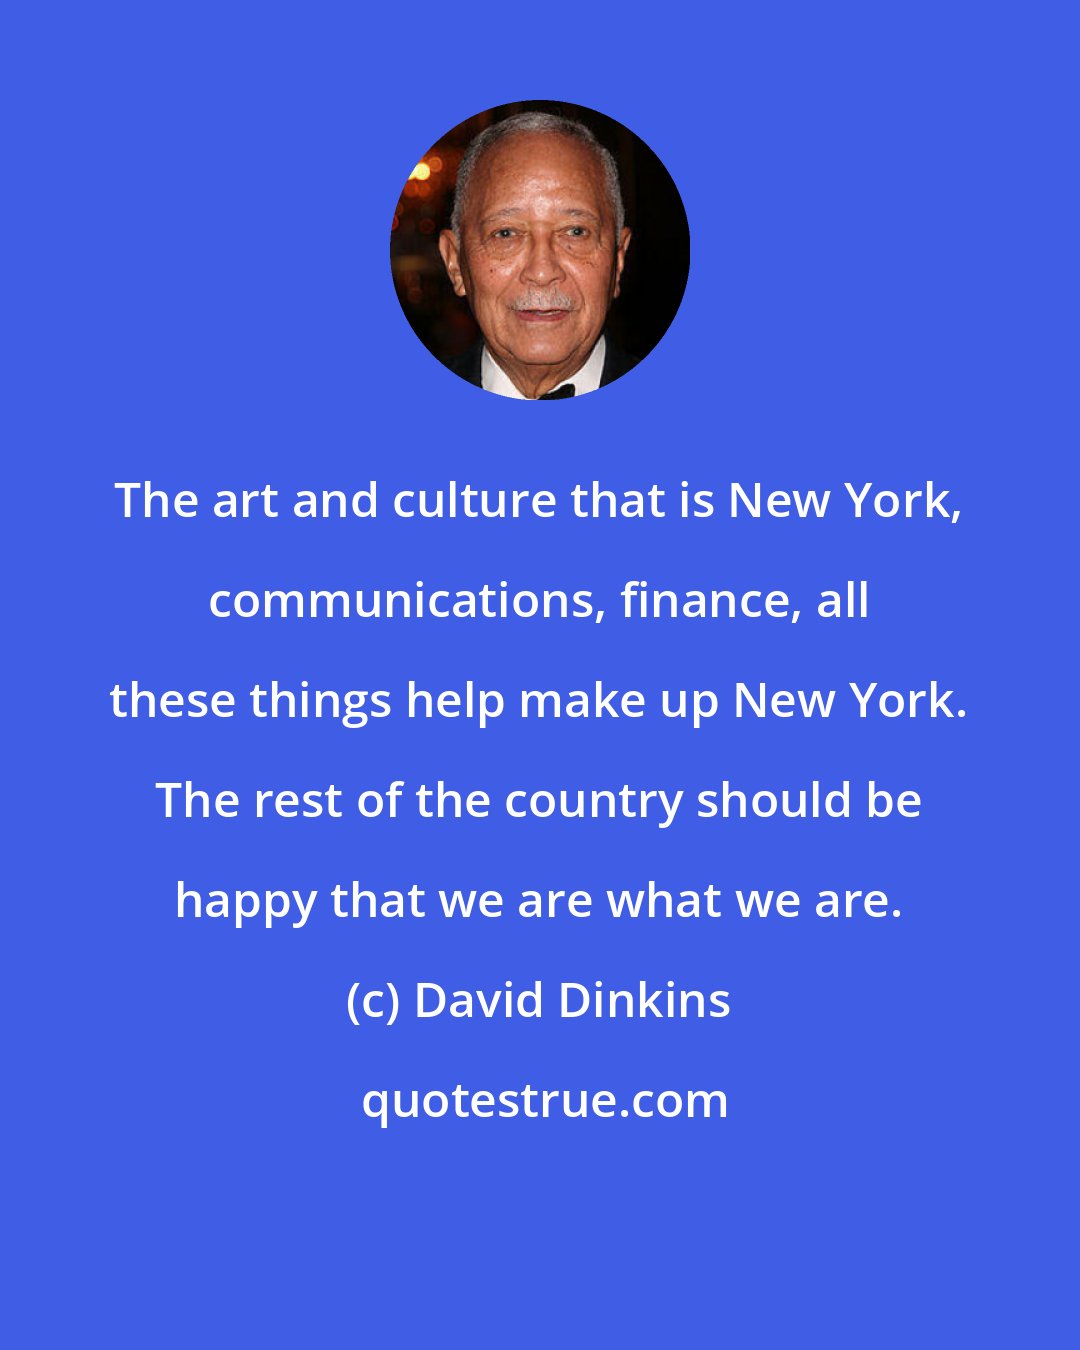 David Dinkins: The art and culture that is New York, communications, finance, all these things help make up New York. The rest of the country should be happy that we are what we are.